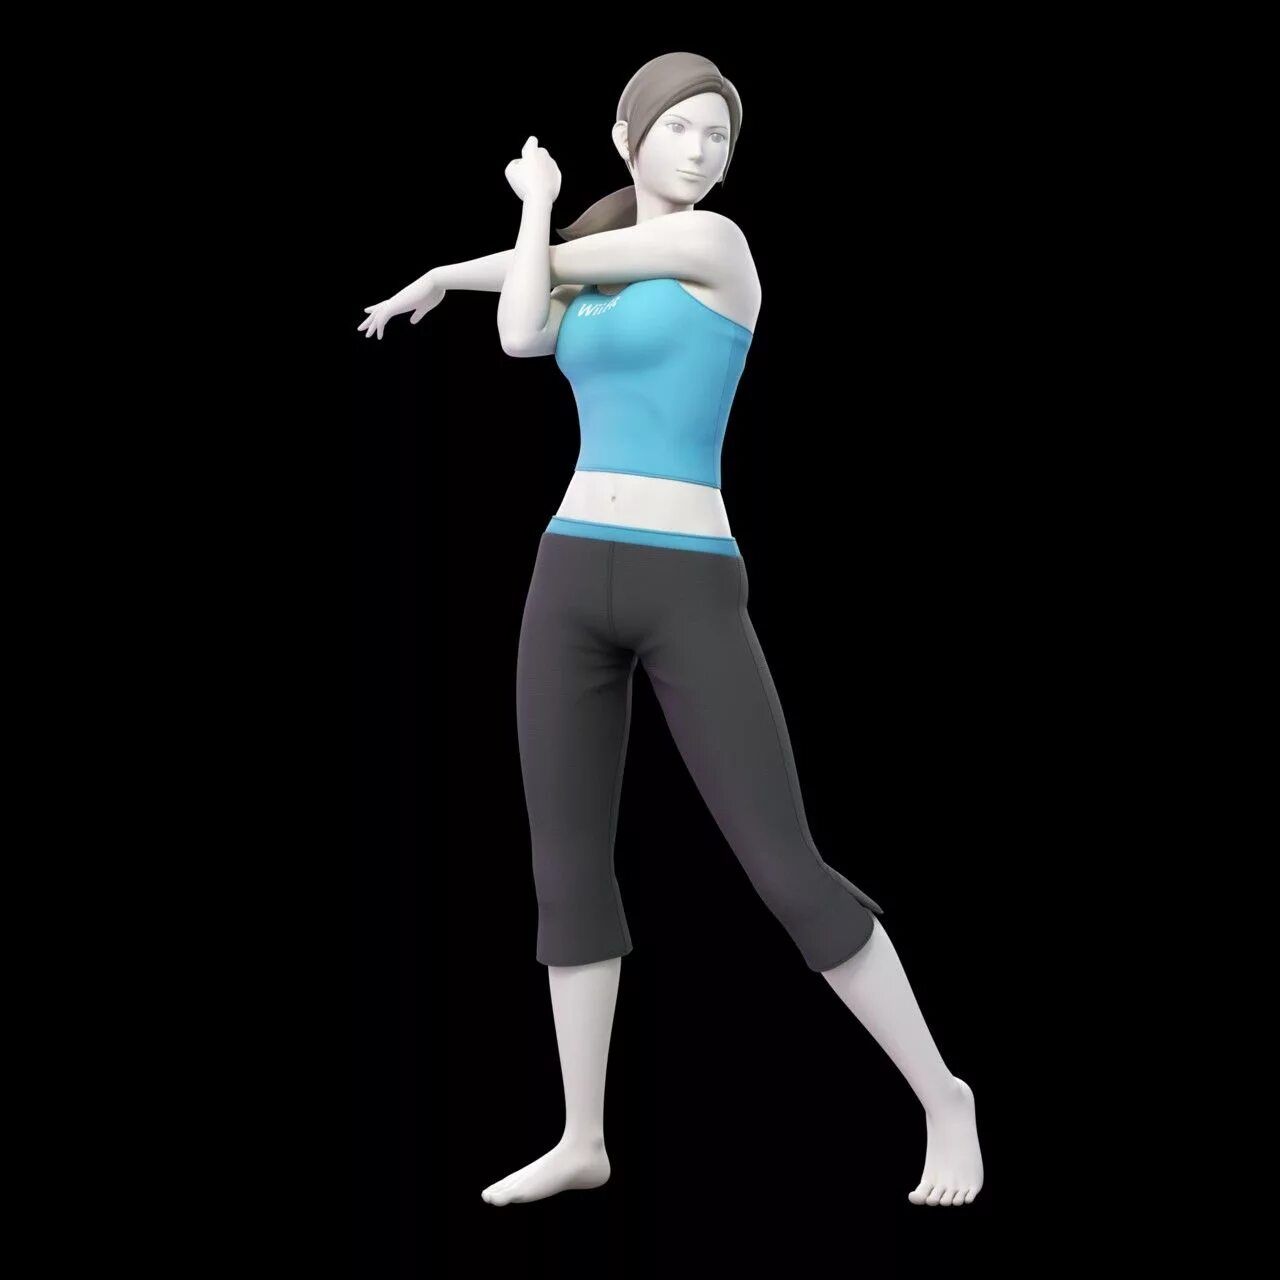 Wii Fit тренер. Wii Fit Trainer super Smash. Wii тренерша. Wii Fit Trainer Smash Bros Ultimate.